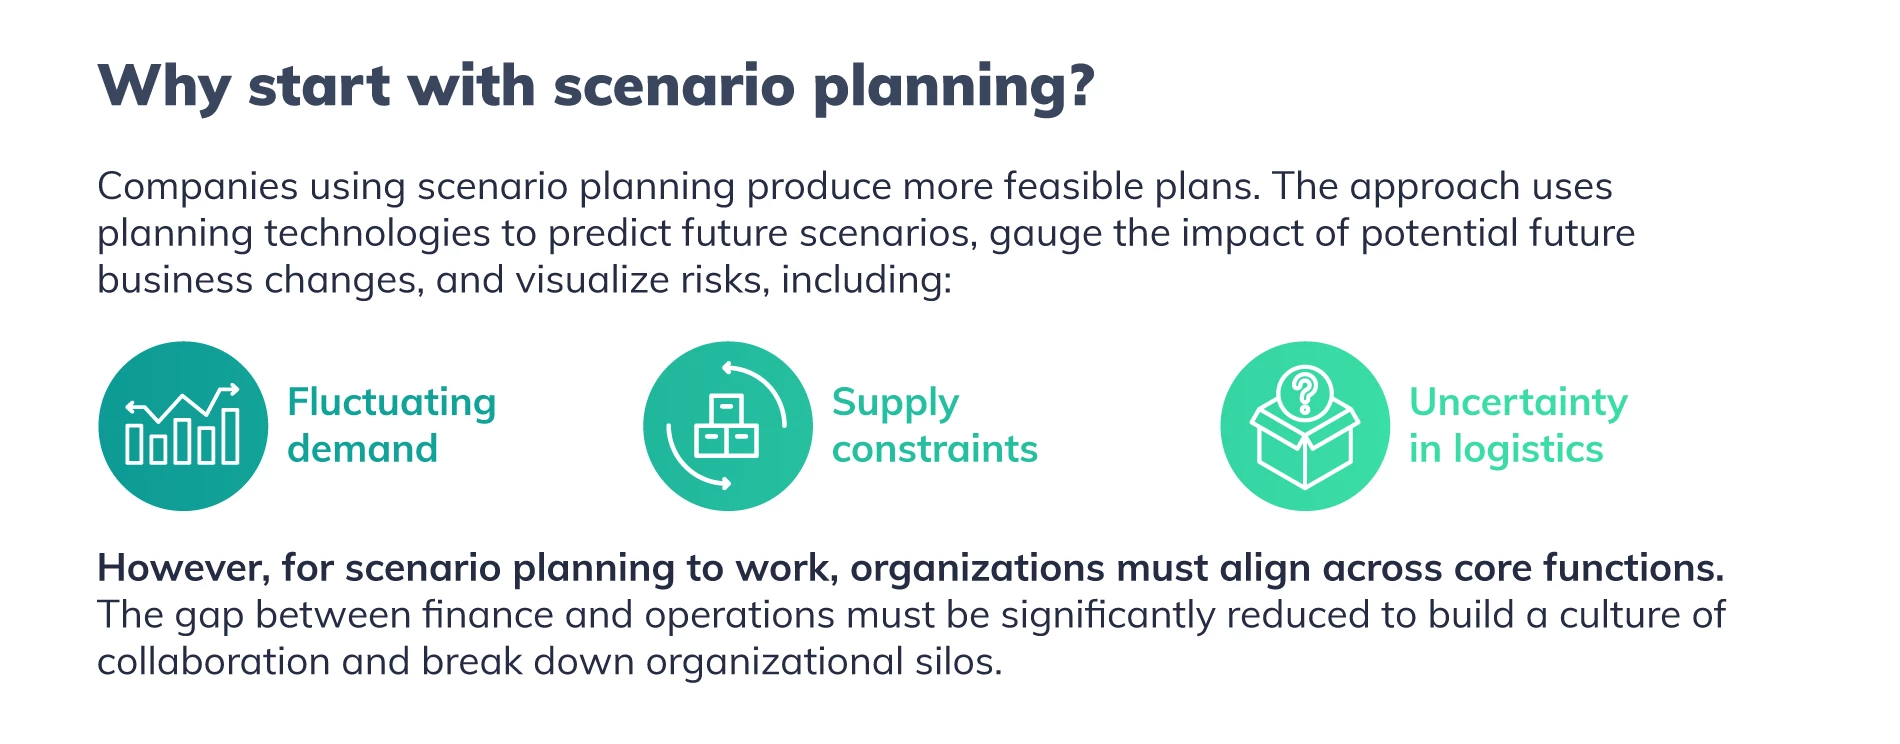 7 steps to supercharge scenario planning Image 2